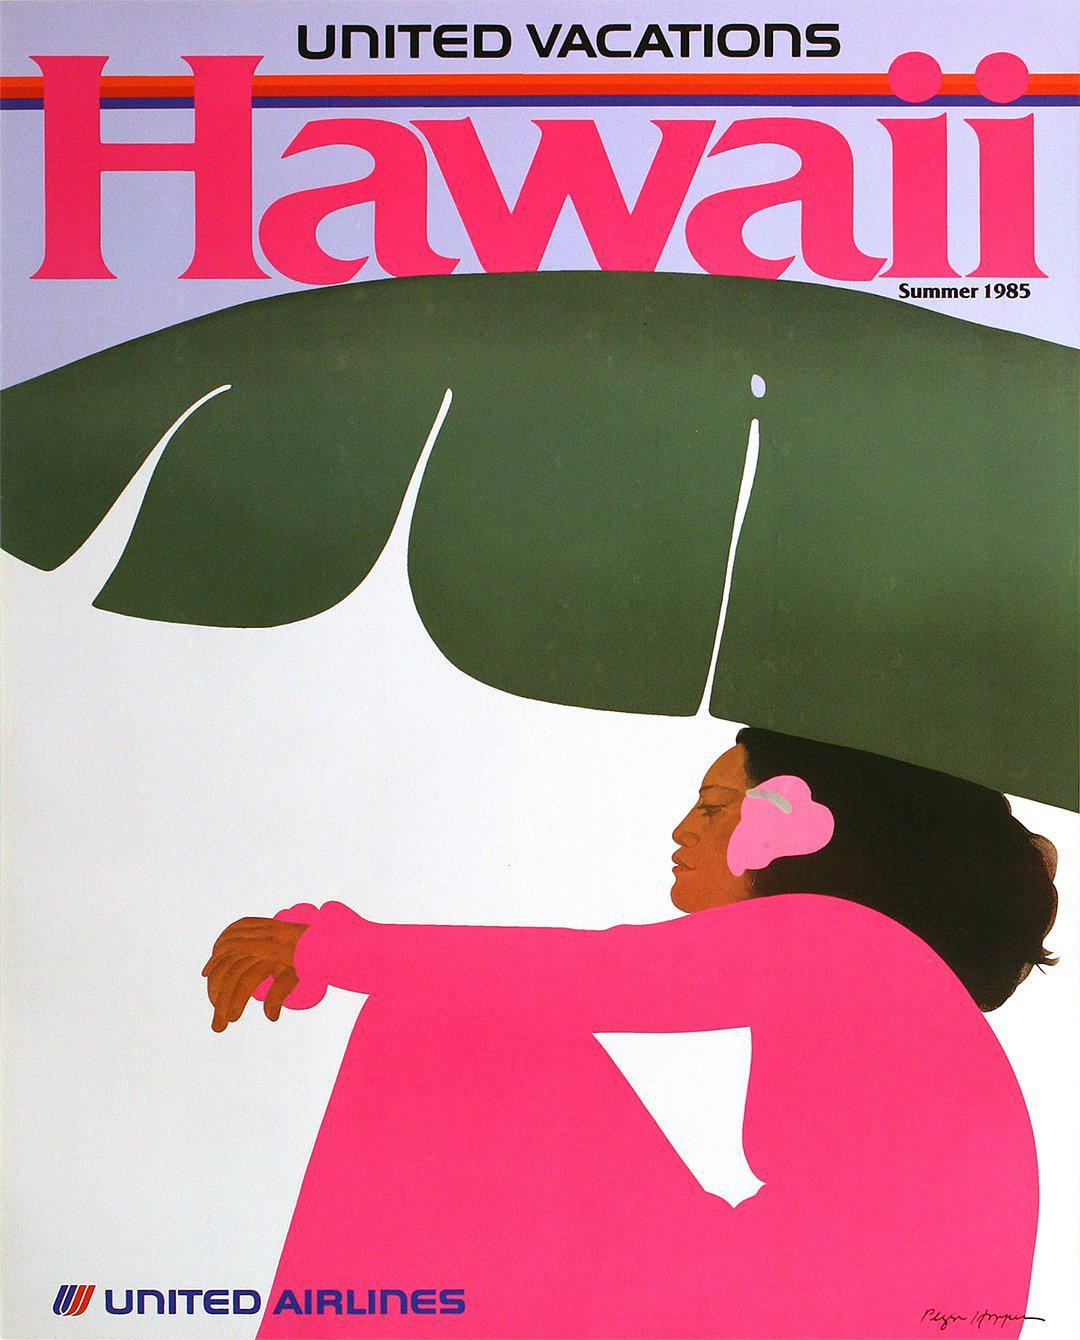 United Airlines Vacations to Hawaii Original Vintage Poster by Pegge Hopper 1985